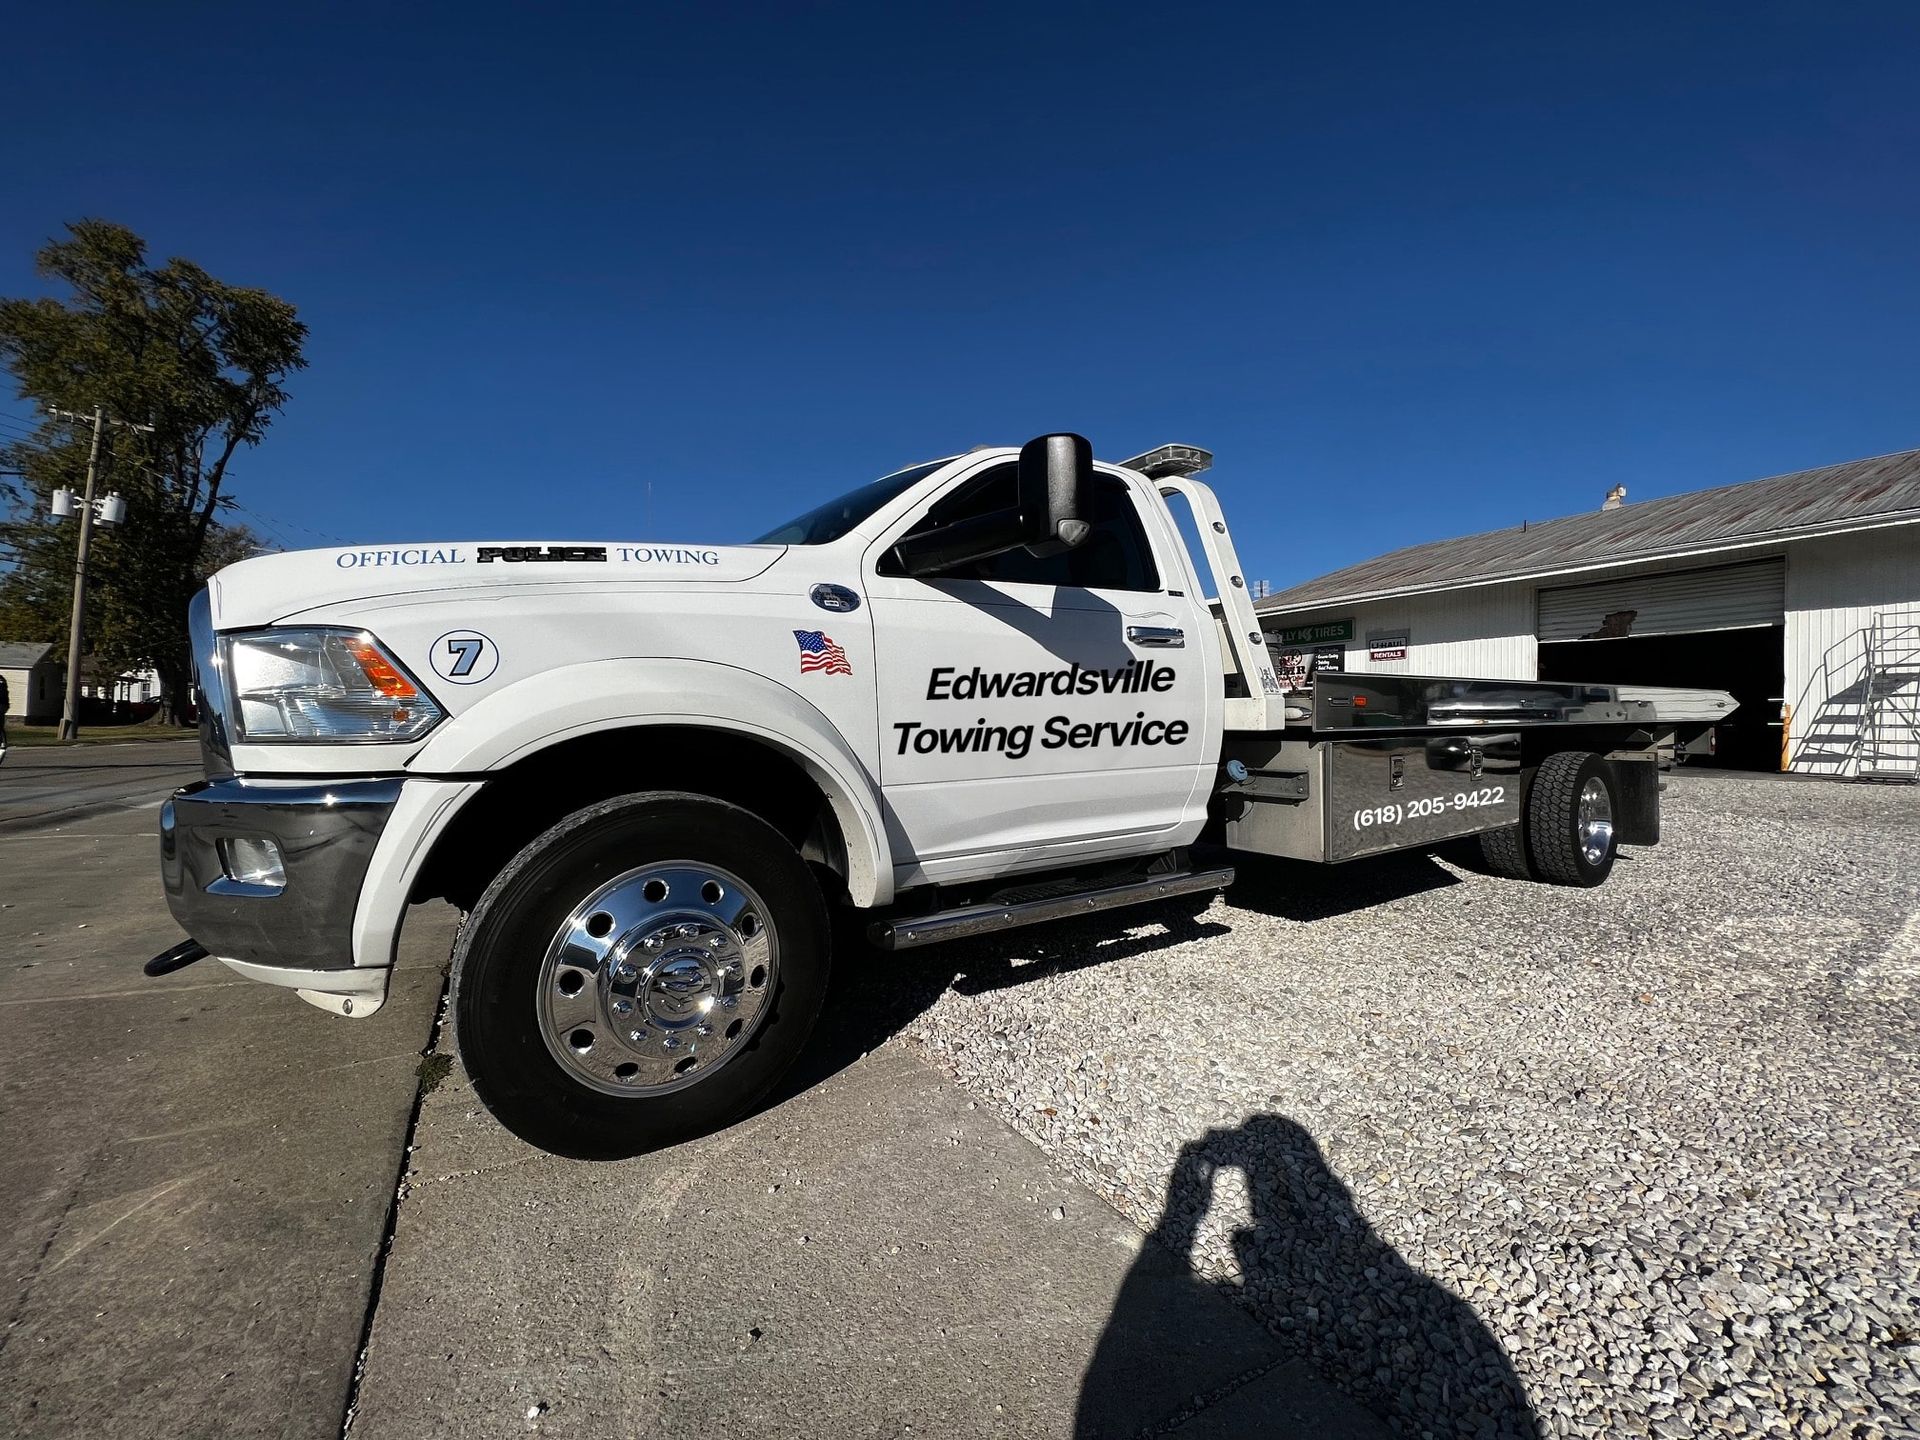 a white towing truck from edwardsville towing service